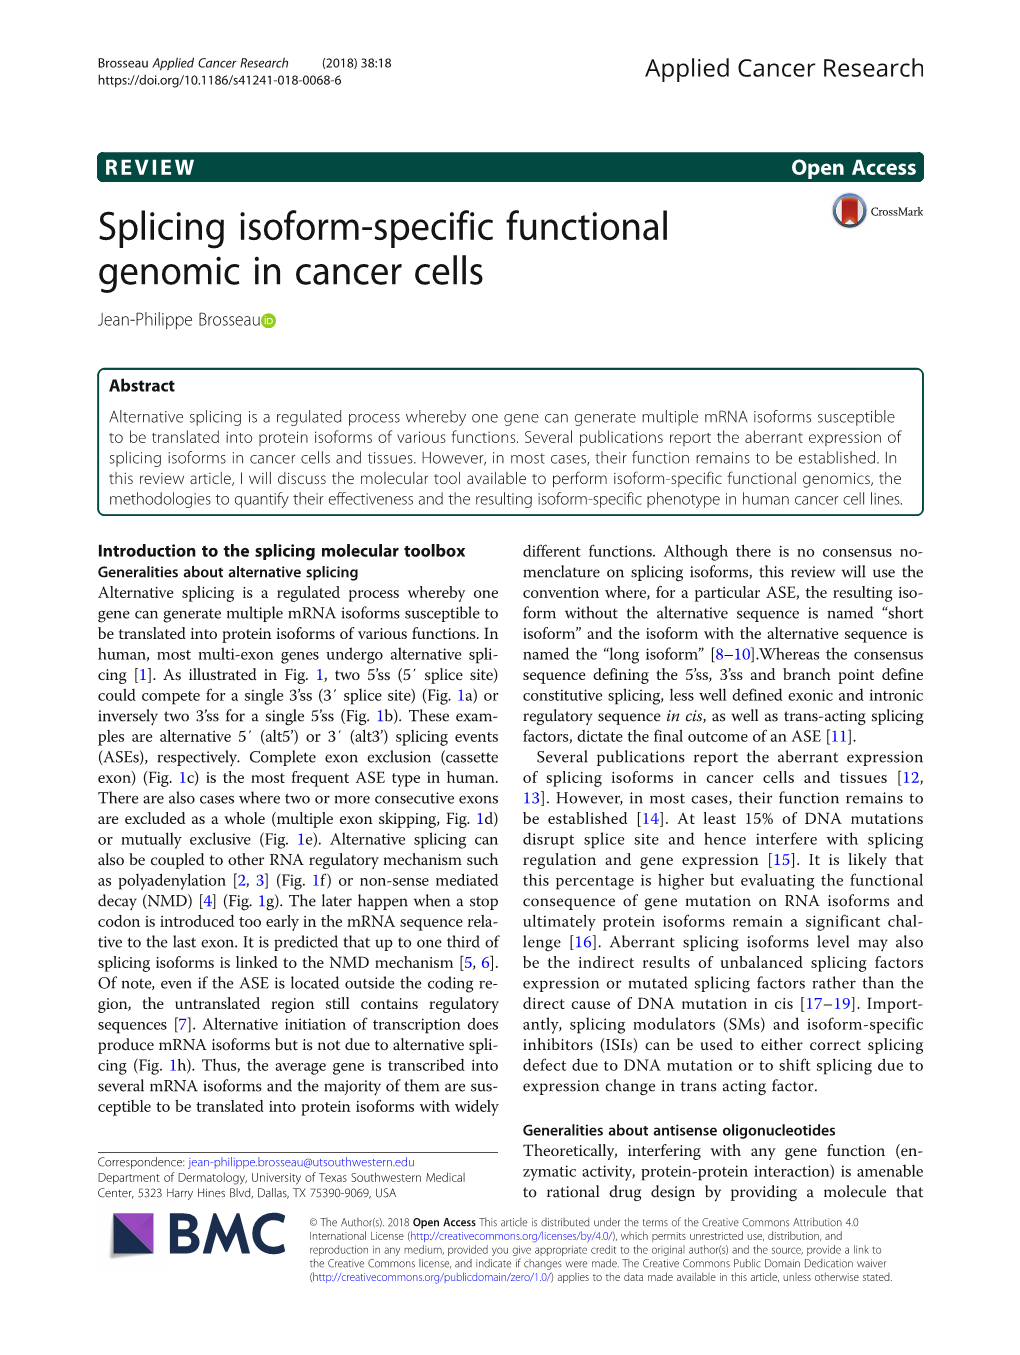 Splicing Isoform-Specific Functional Genomic in Cancer Cells Jean-Philippe Brosseau